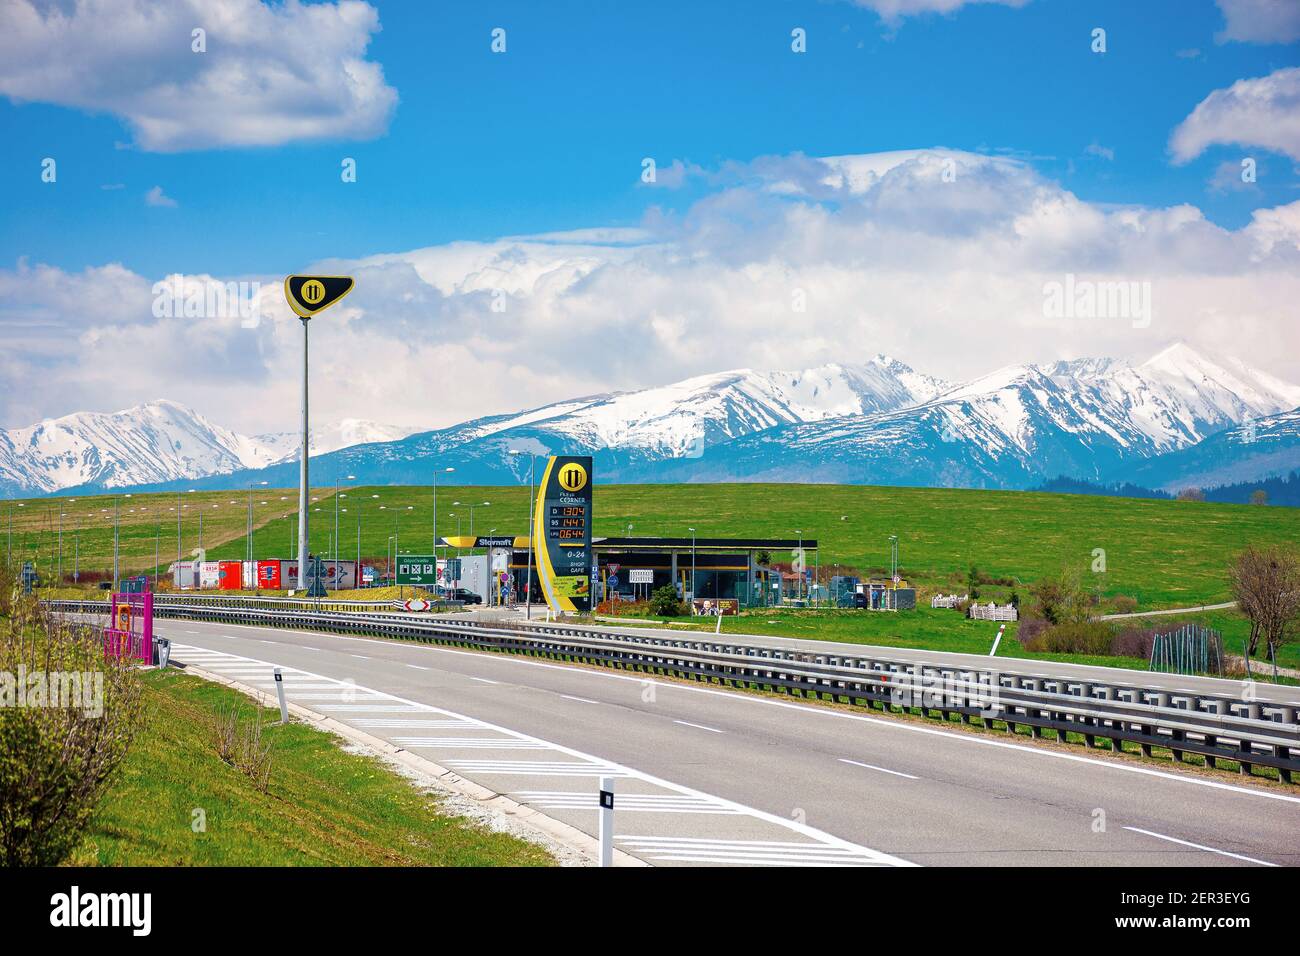 strba, slovakia - 01 MAY 2019: slovnaft gas station on a freeway. sunny scenery with green meadows beneath a blue sky with fluffy clouds. snow capped Stock Photo